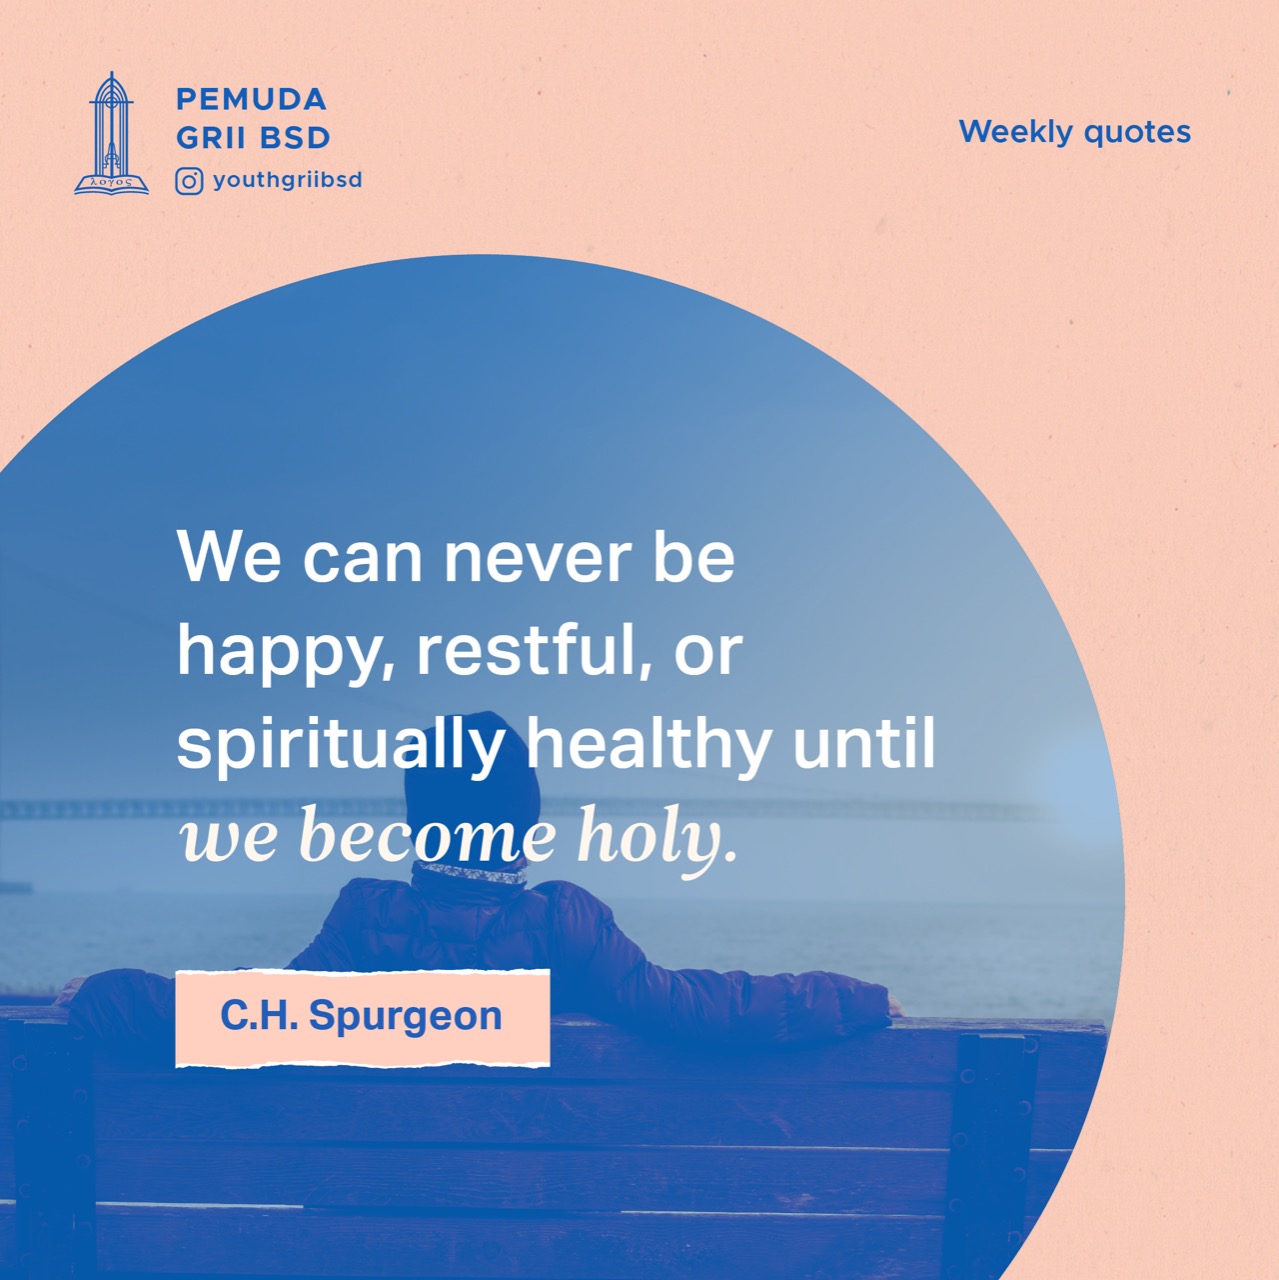 We can never be happy, restful, or spiritually healthy until we become holy.